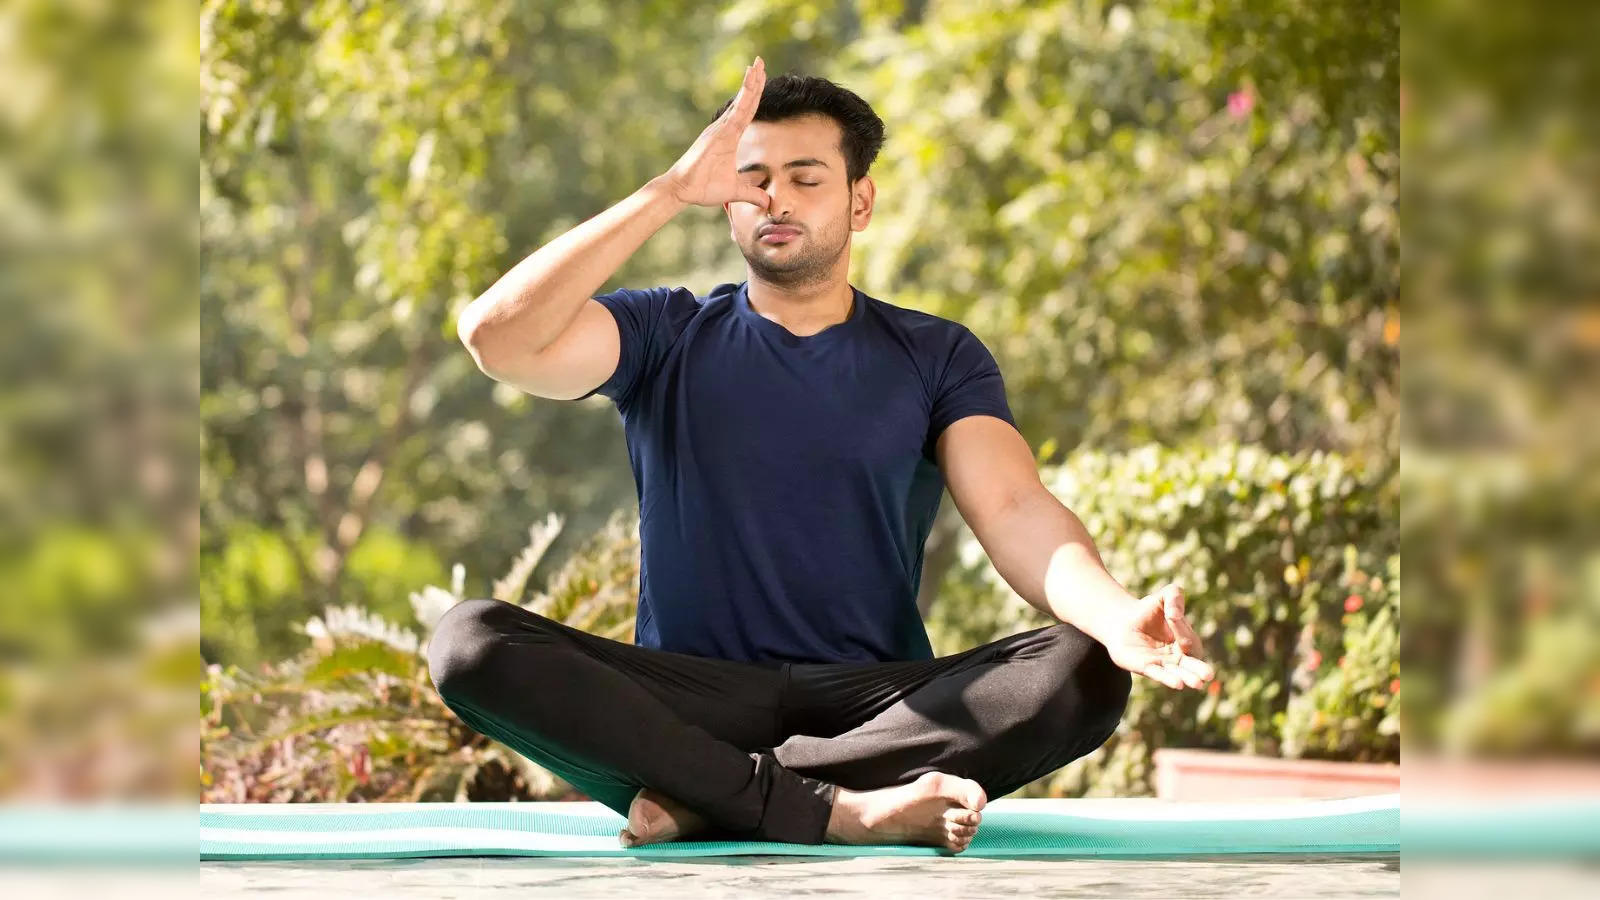 Yoga for Beginners – The Secret to Mental and Physical Well-Being